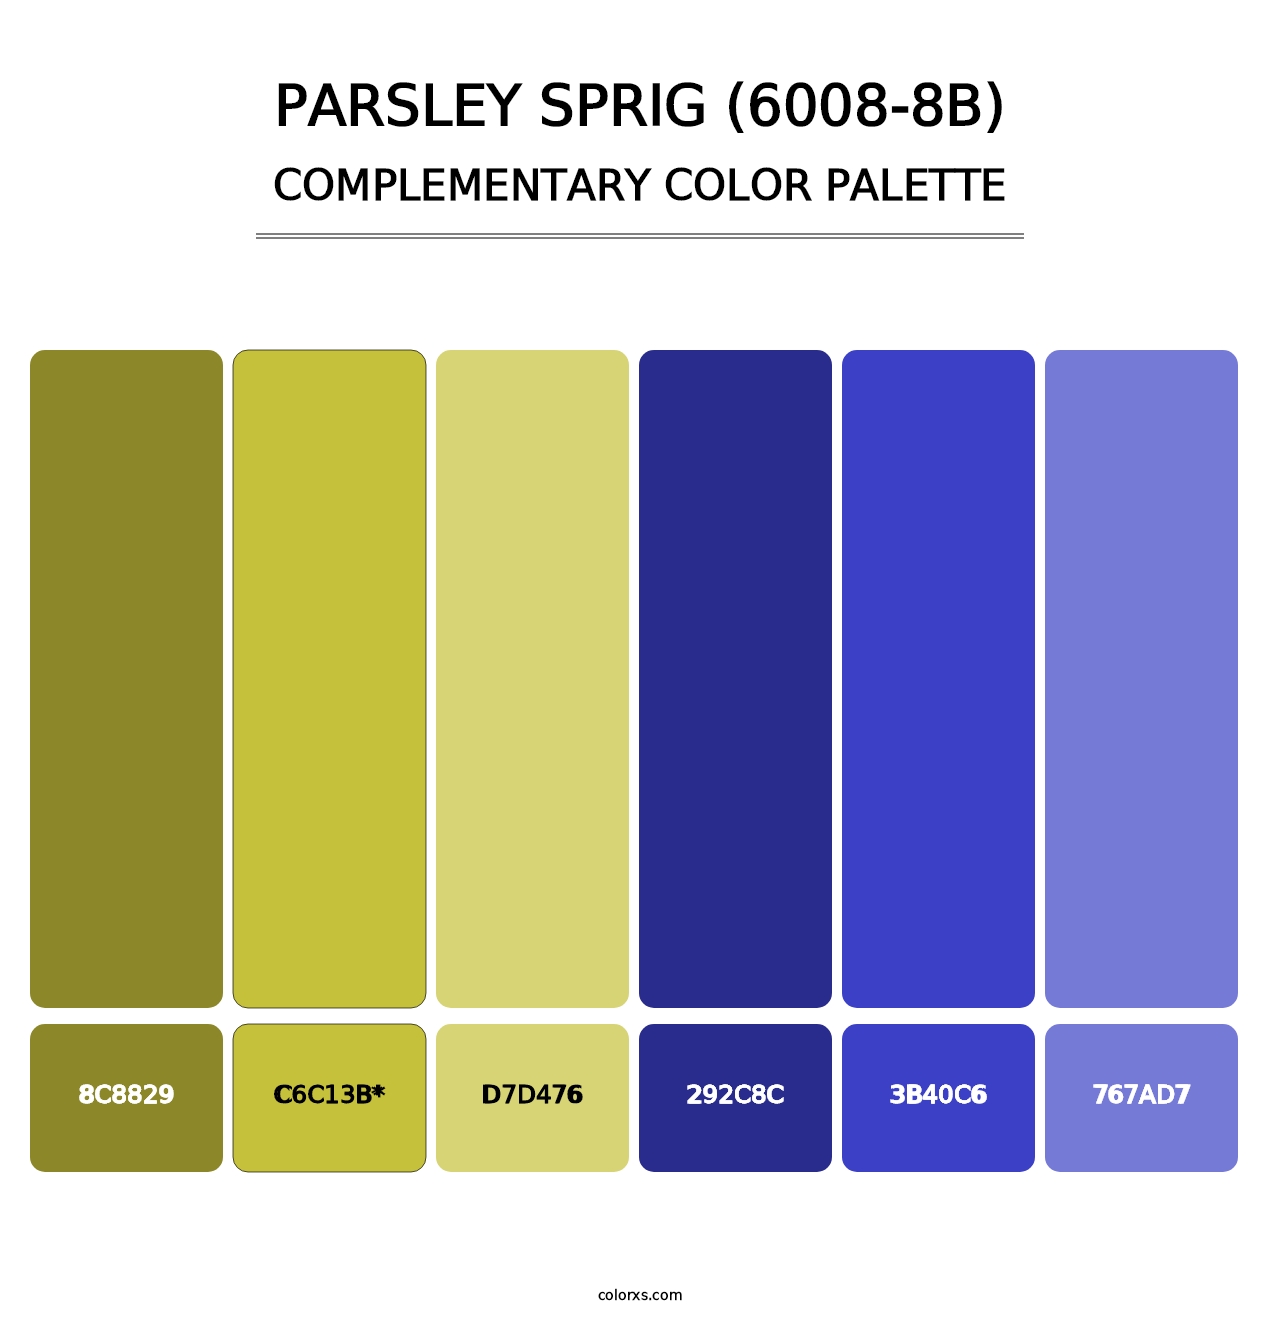 Parsley Sprig (6008-8B) - Complementary Color Palette